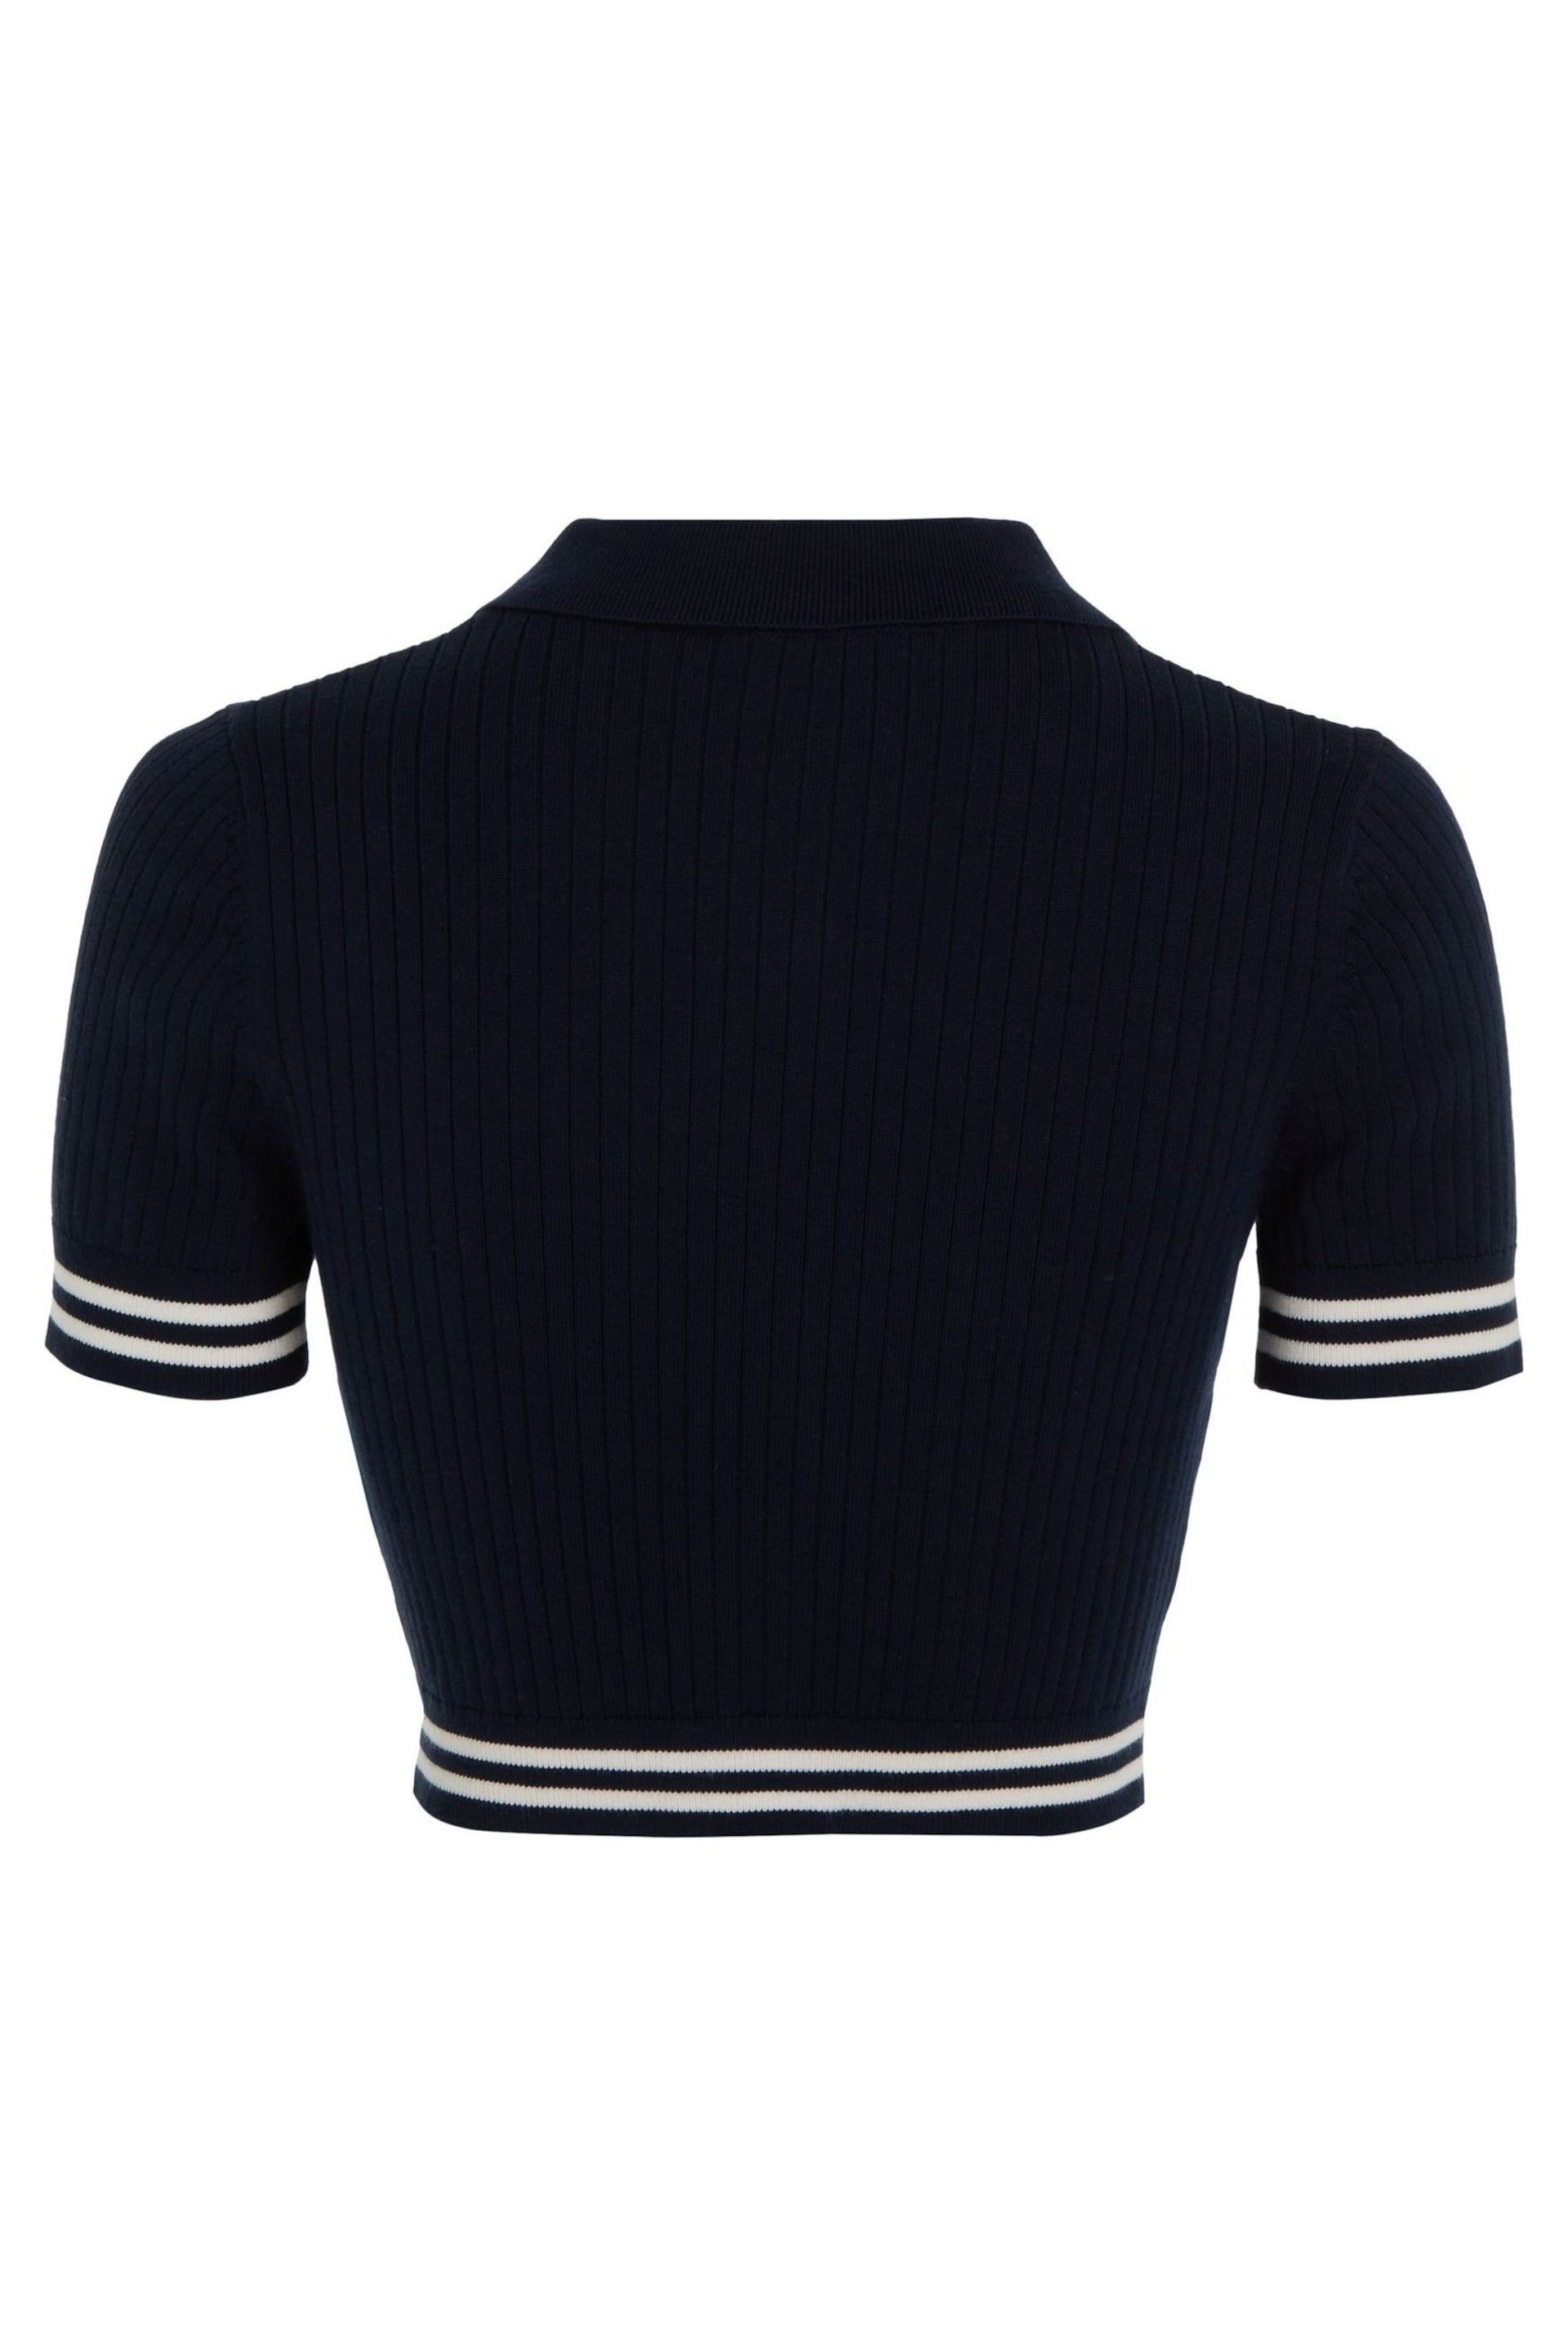 Tommy Jeans Blue Script Rib Polo Sweater - Image 5 of 6